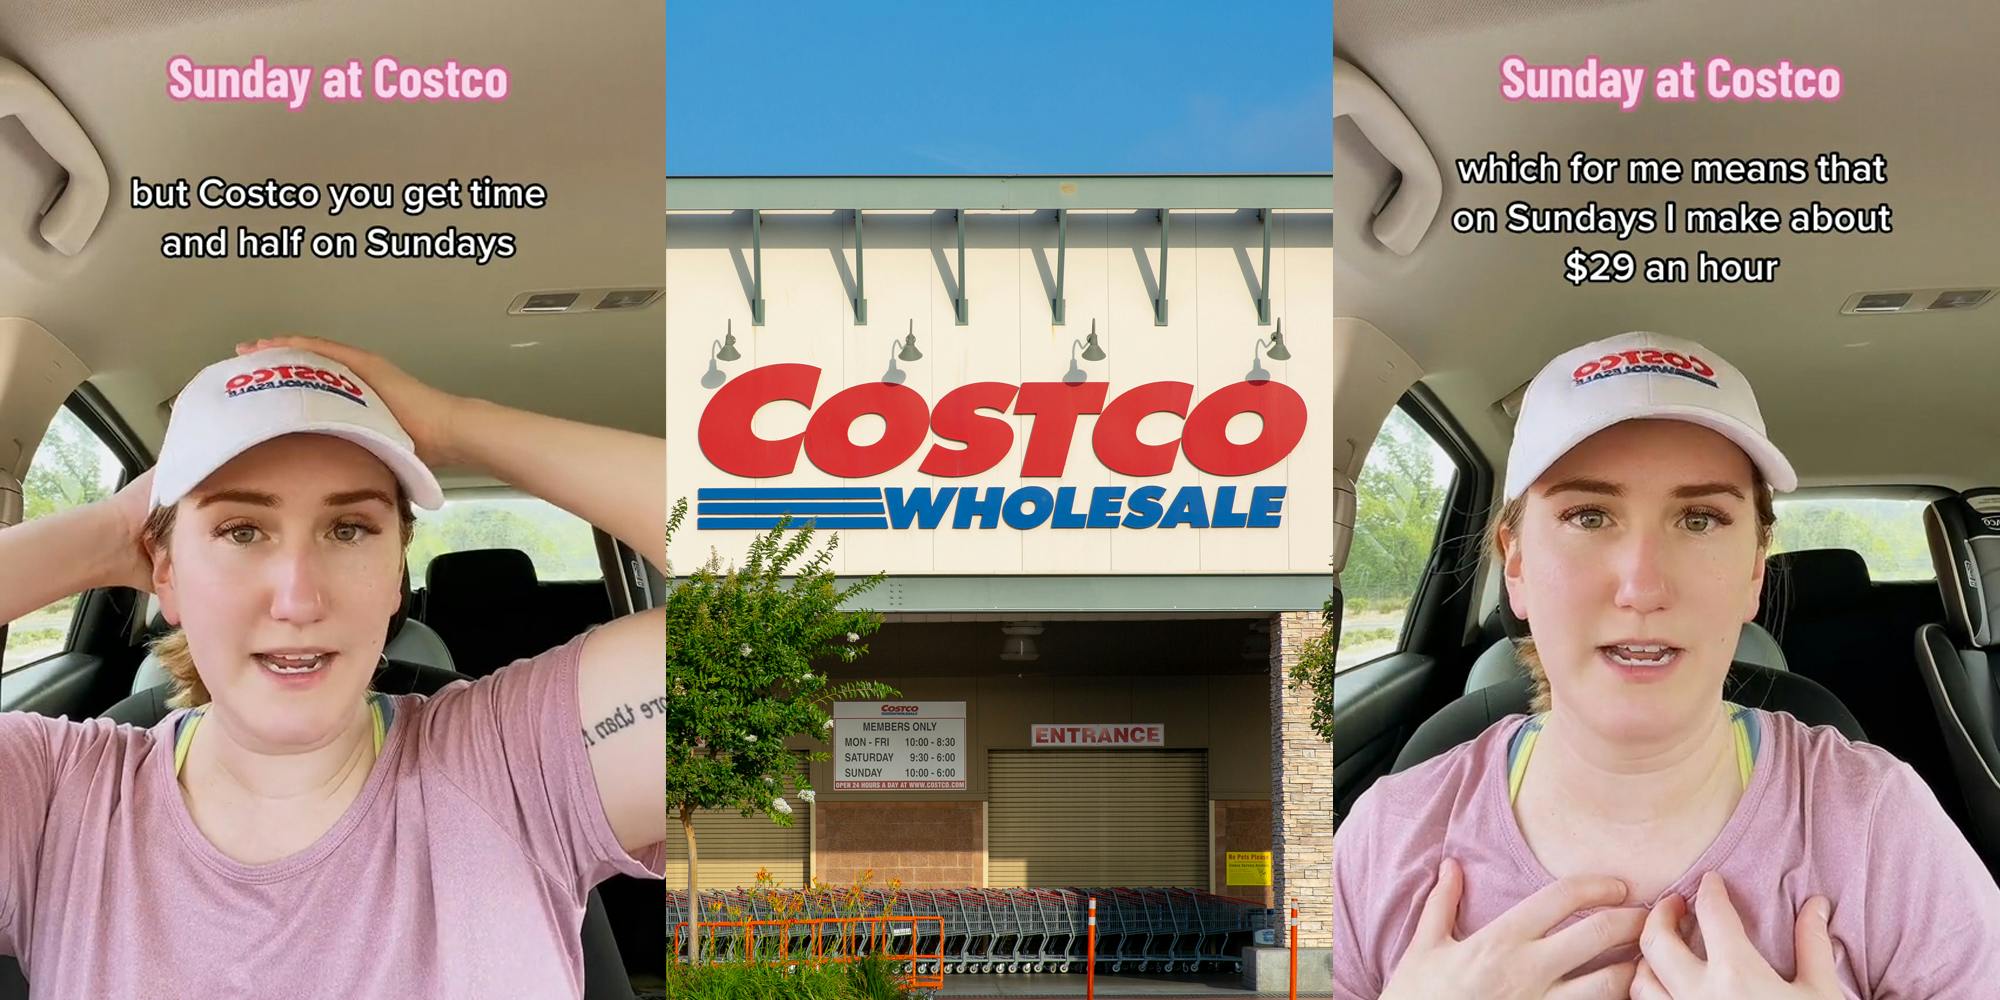 Costco employee speaking in car with caption "Sunday at Costco" "but Costco you get time and half on Sundays" (l) Costco entrance with sign (c) Costco employee speaking in car with caption "Sunday at Costco" "which for me means that on Sundays I make about $29 an hour" (r)